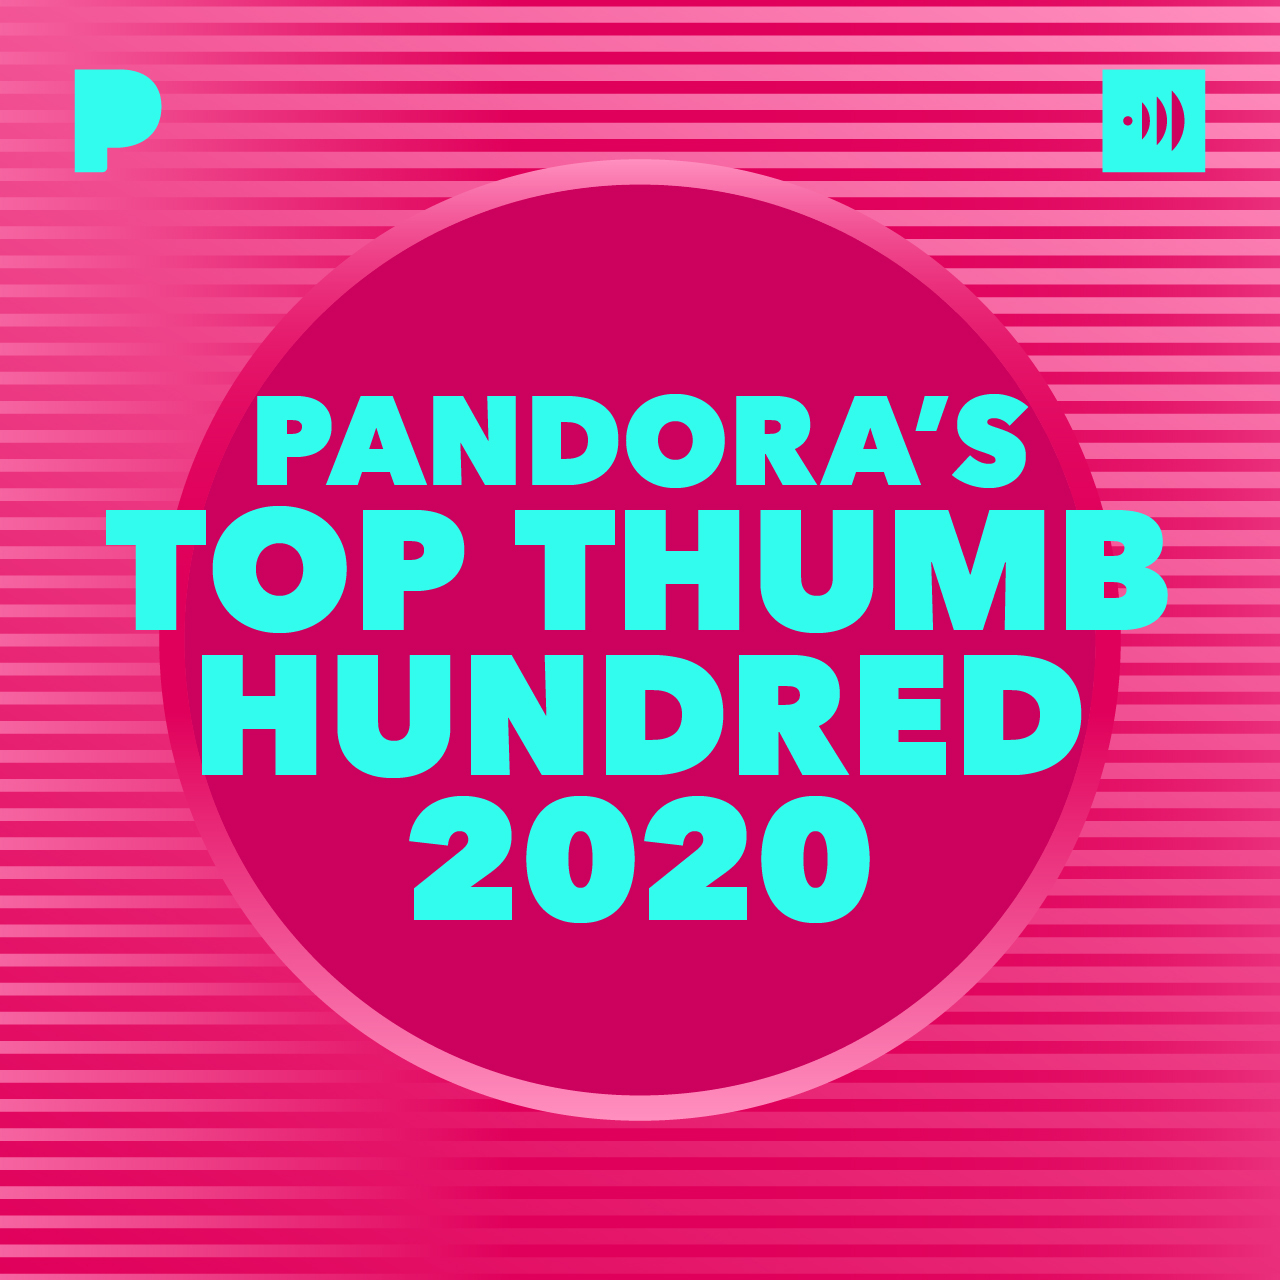 Pandora’s Top Thumb Hundred 2020 – the most thumbed up tracks of the year